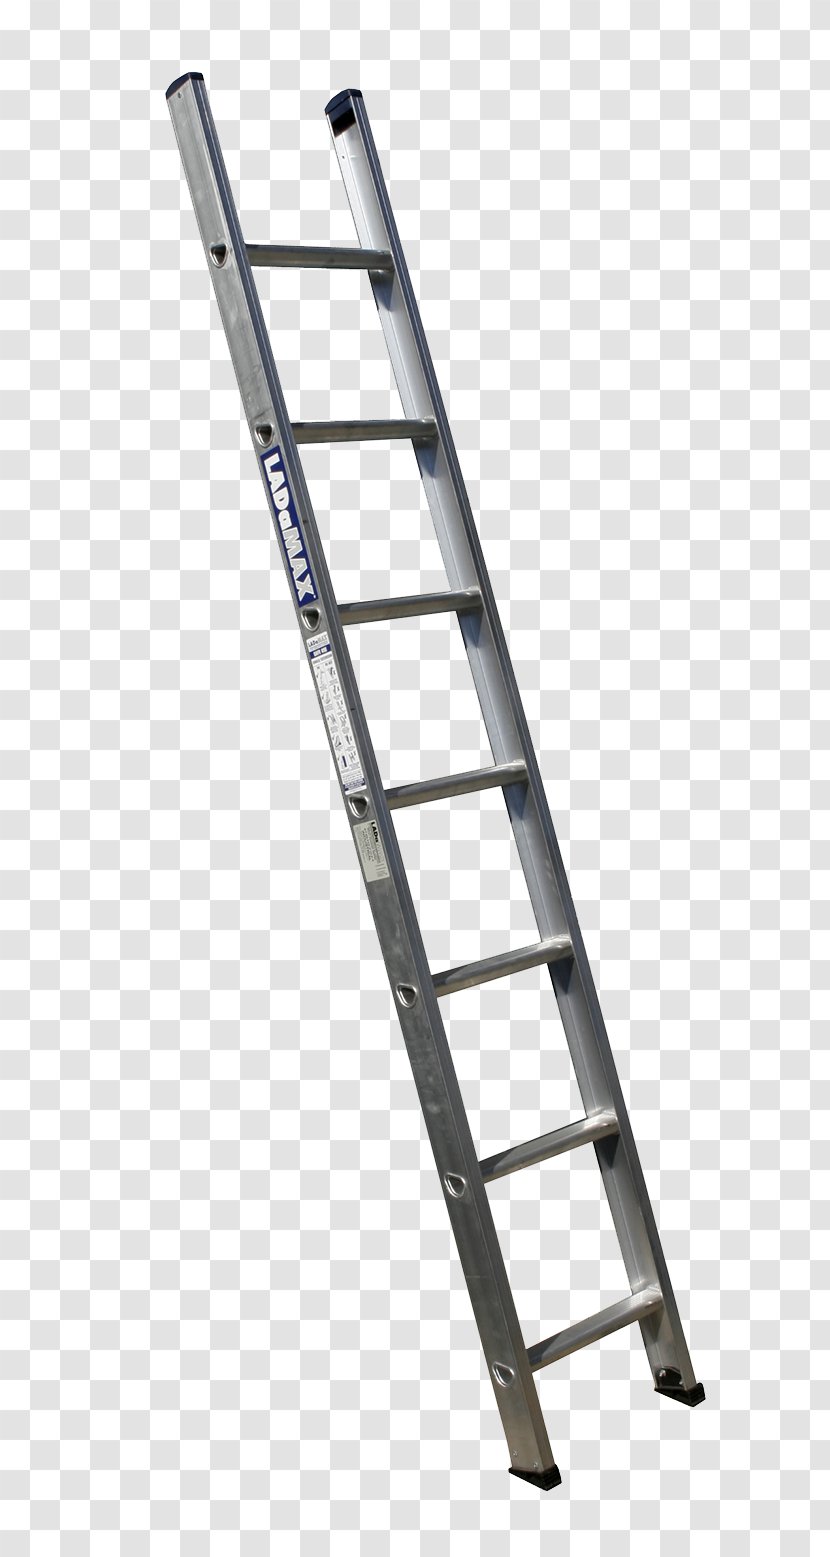 GOODWILL ENGINEERING COMPANY Aluminium Ladders Export Industry - Tool - Ladder Transparent PNG